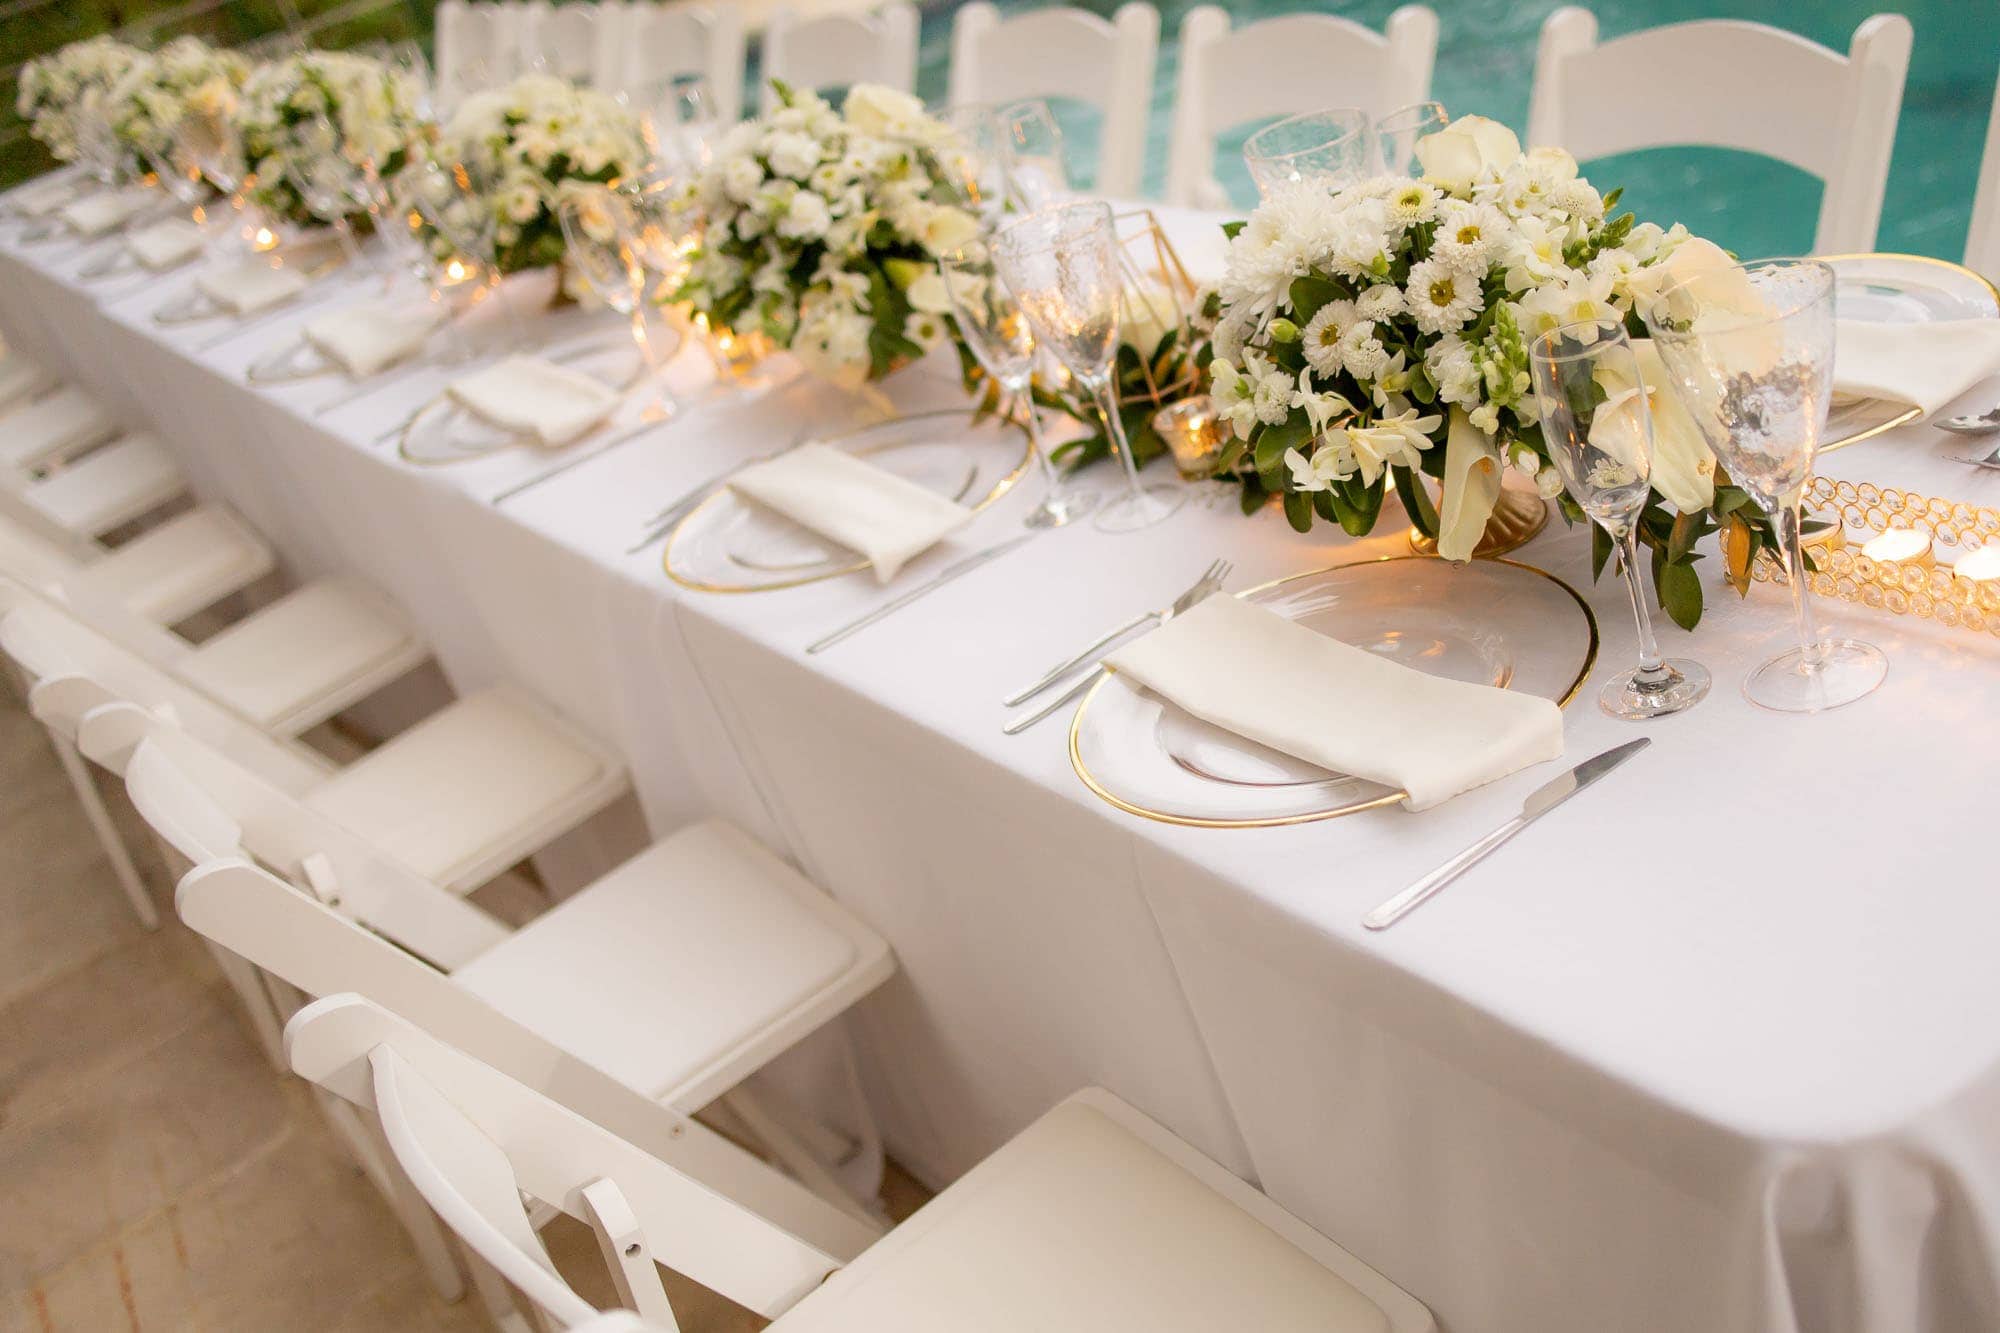 The lovely reception table